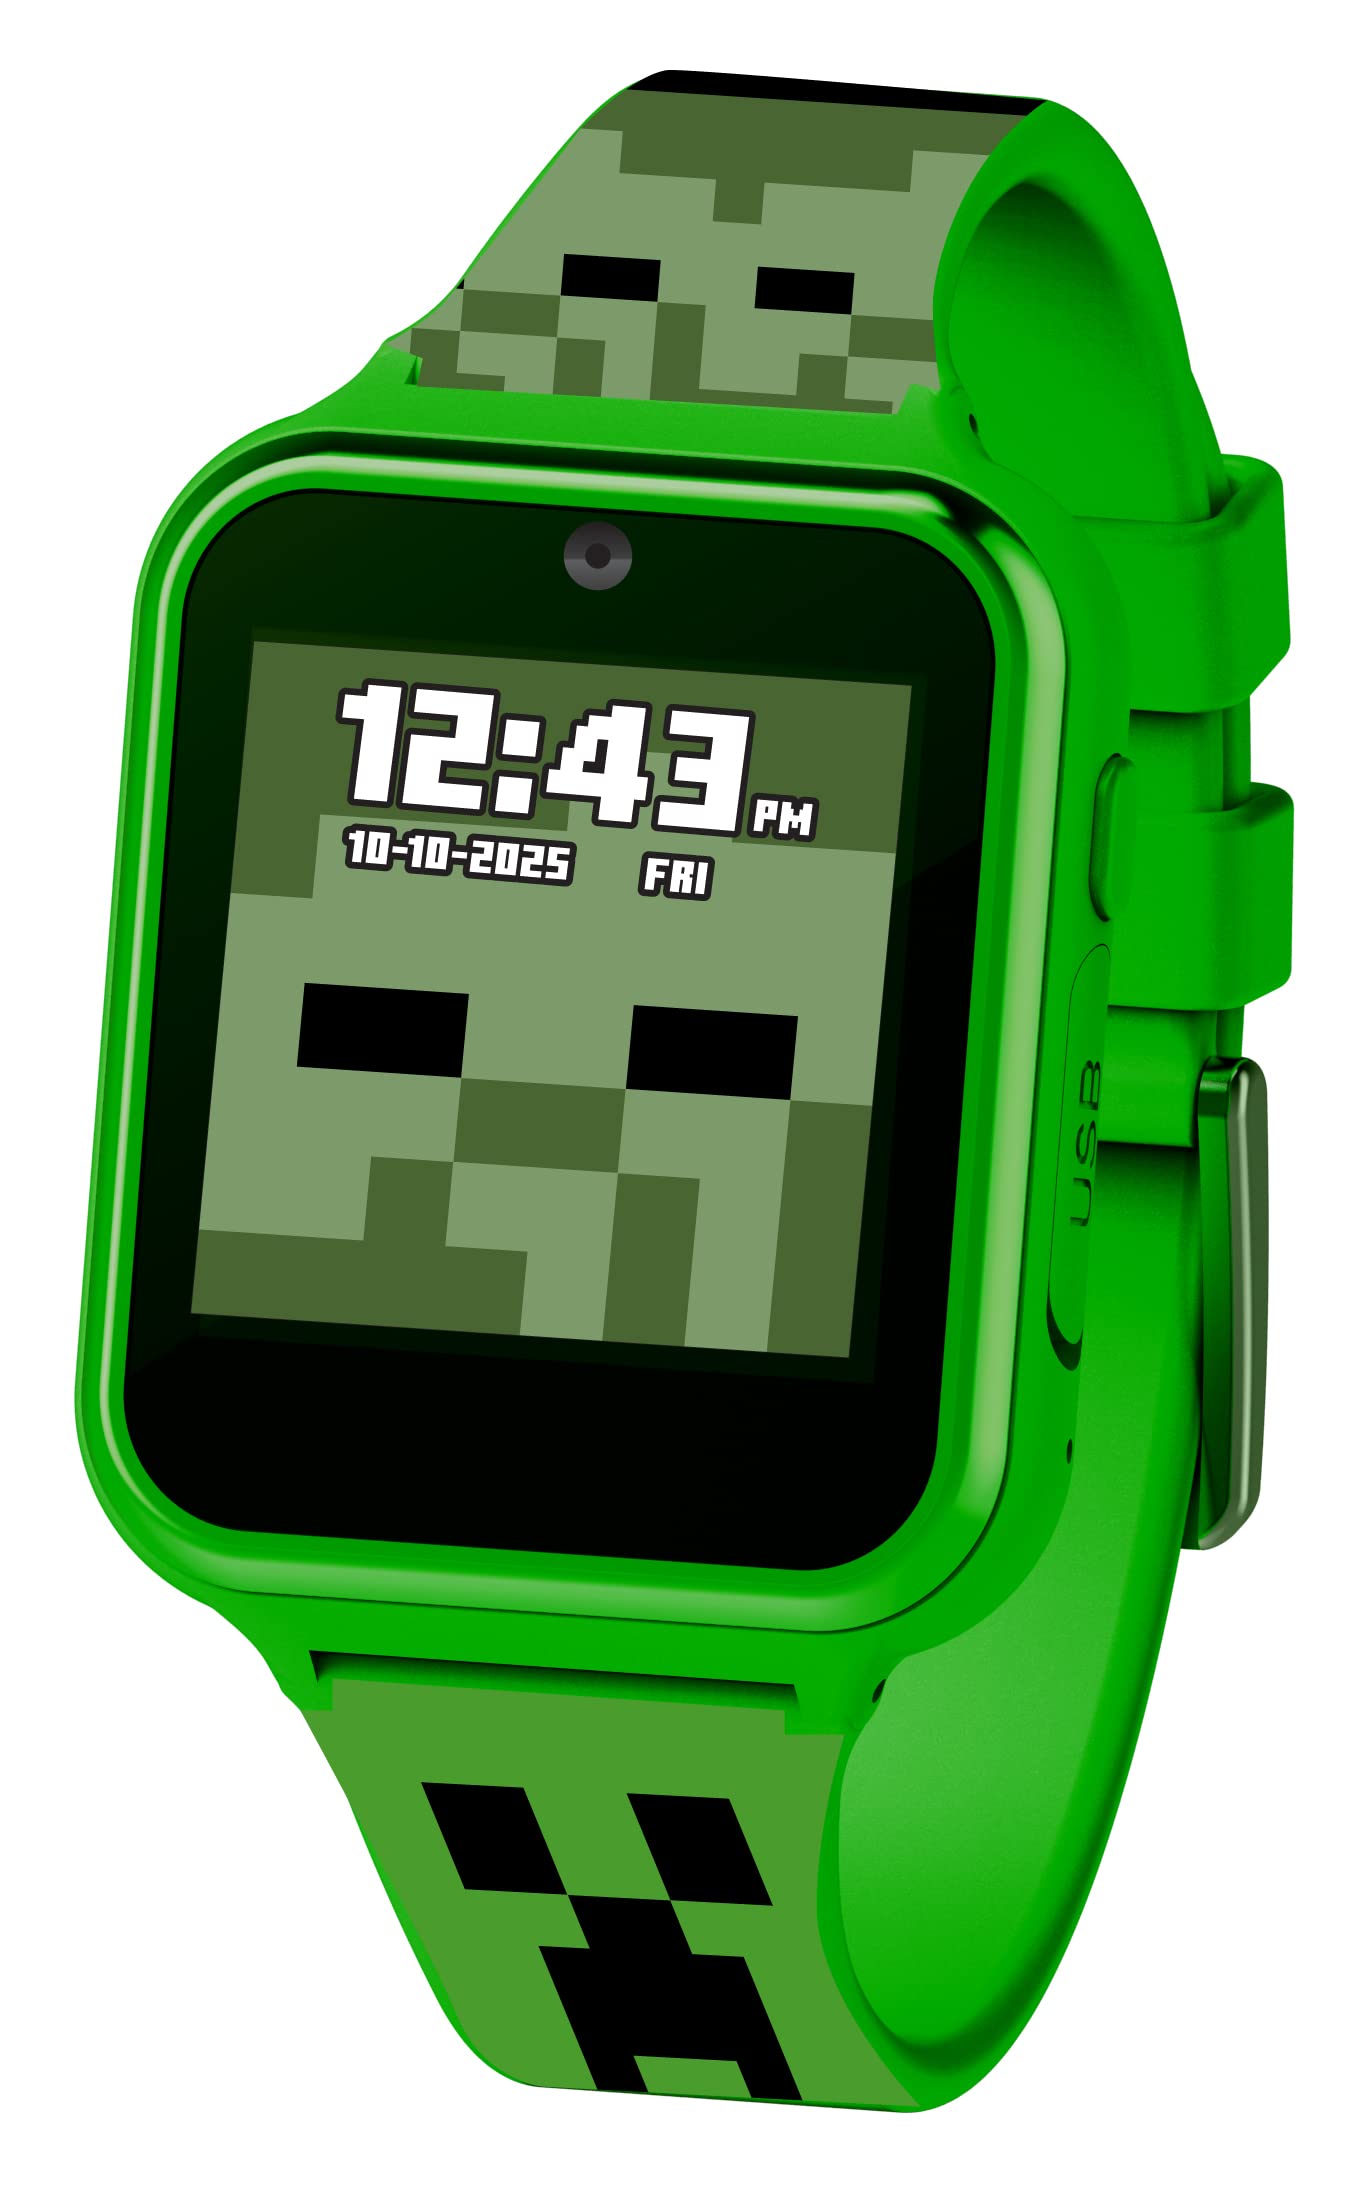 Accutime Minecraft Kids Green Educational Learning Touchscreen Smart Watch Toy for Girls, Boys, Toddlers - Selfie Cam, Learning Games, Alarm, Calculator, Pedometer & More (Model: MIN4130AZ)